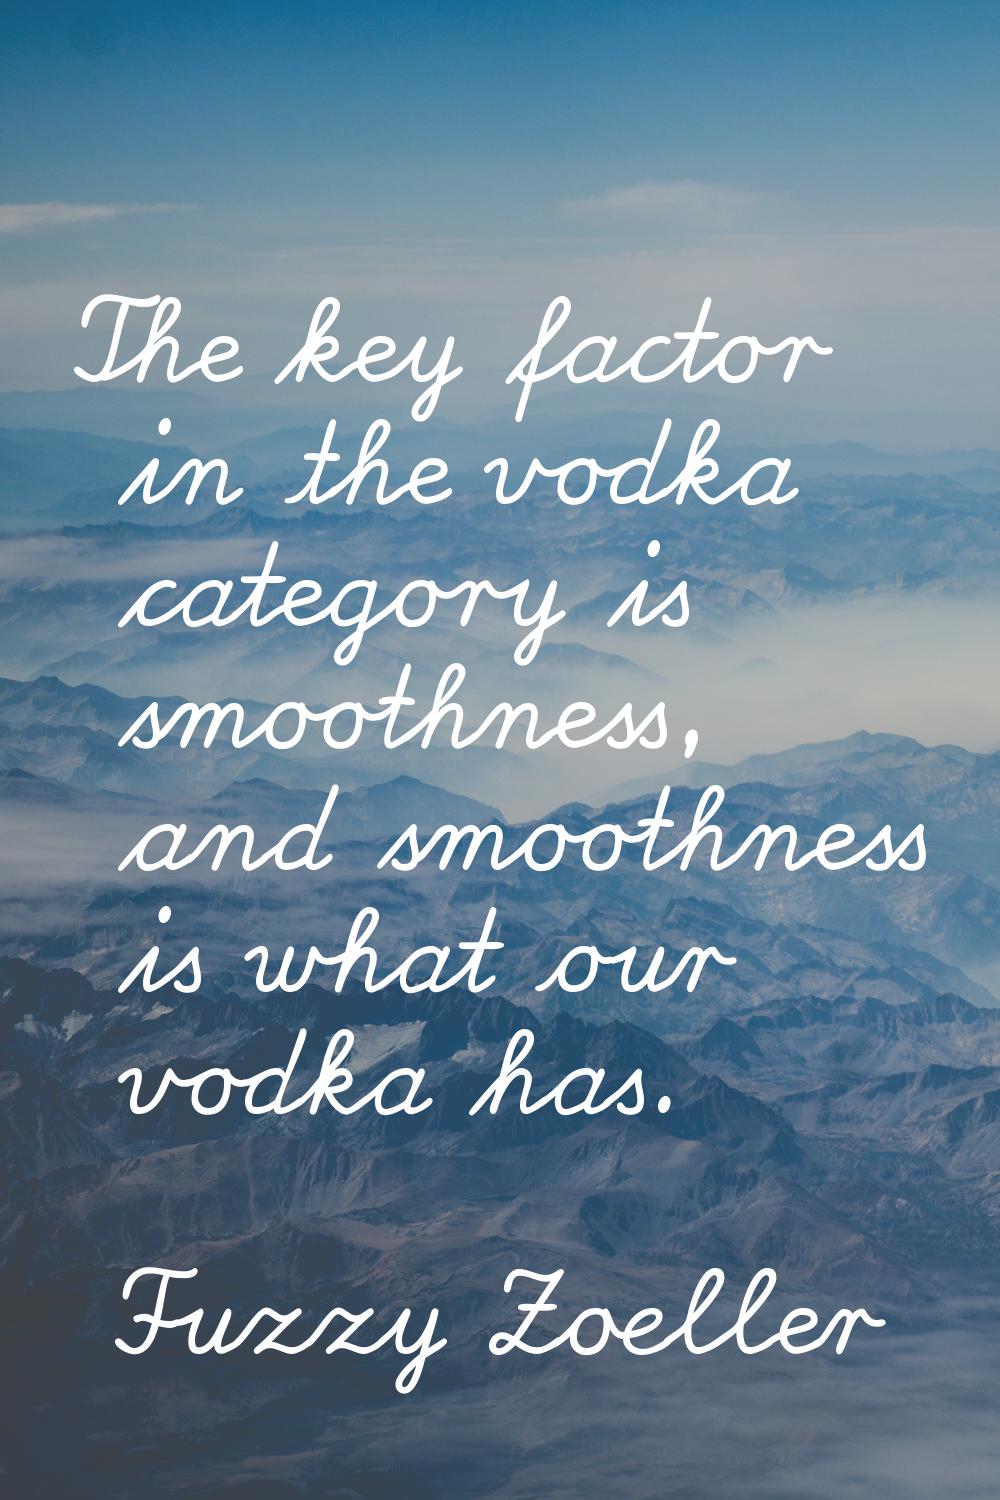 The key factor in the vodka category is smoothness, and smoothness is what our vodka has.